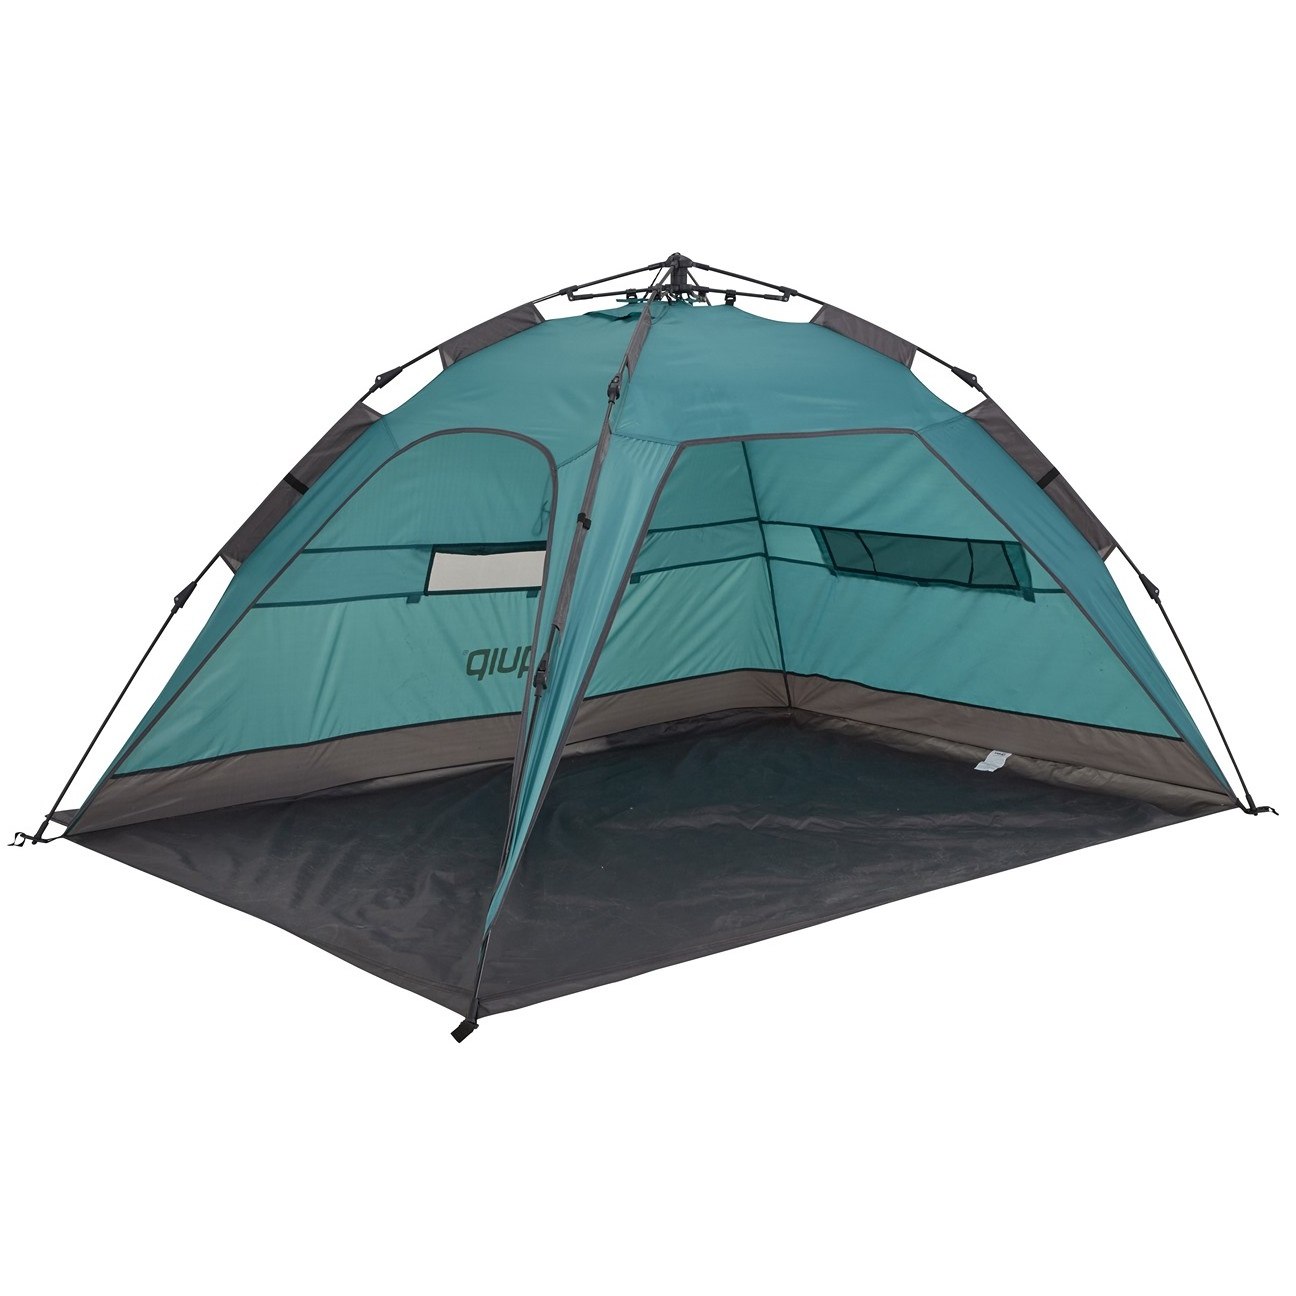 Picture of Uquip Buzzy Beach Shelter - petrol/grey